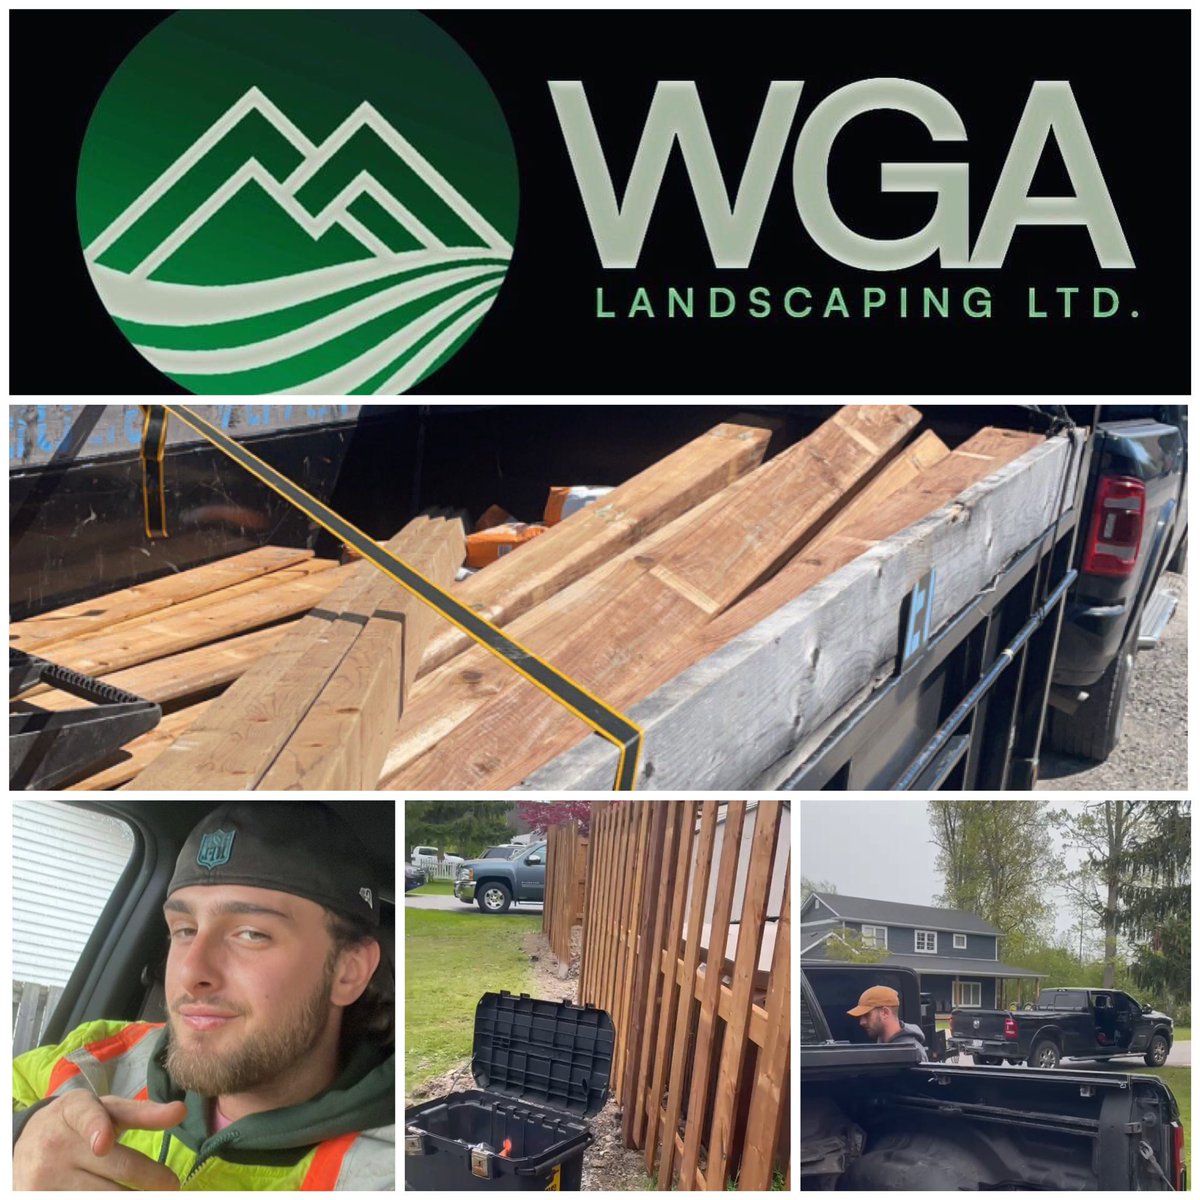 #WGAWednesday
Alongside longtime friend, @BrendenGarrett_ , Alex is back at the BCB grind with the rebranded business they have worked together on - WGA Landscaping, LTD
Niagara region, hit them up. 
#AJM #Canadianbusiness #grinding #agoodtired #WGA #wgatwd 🇨🇦